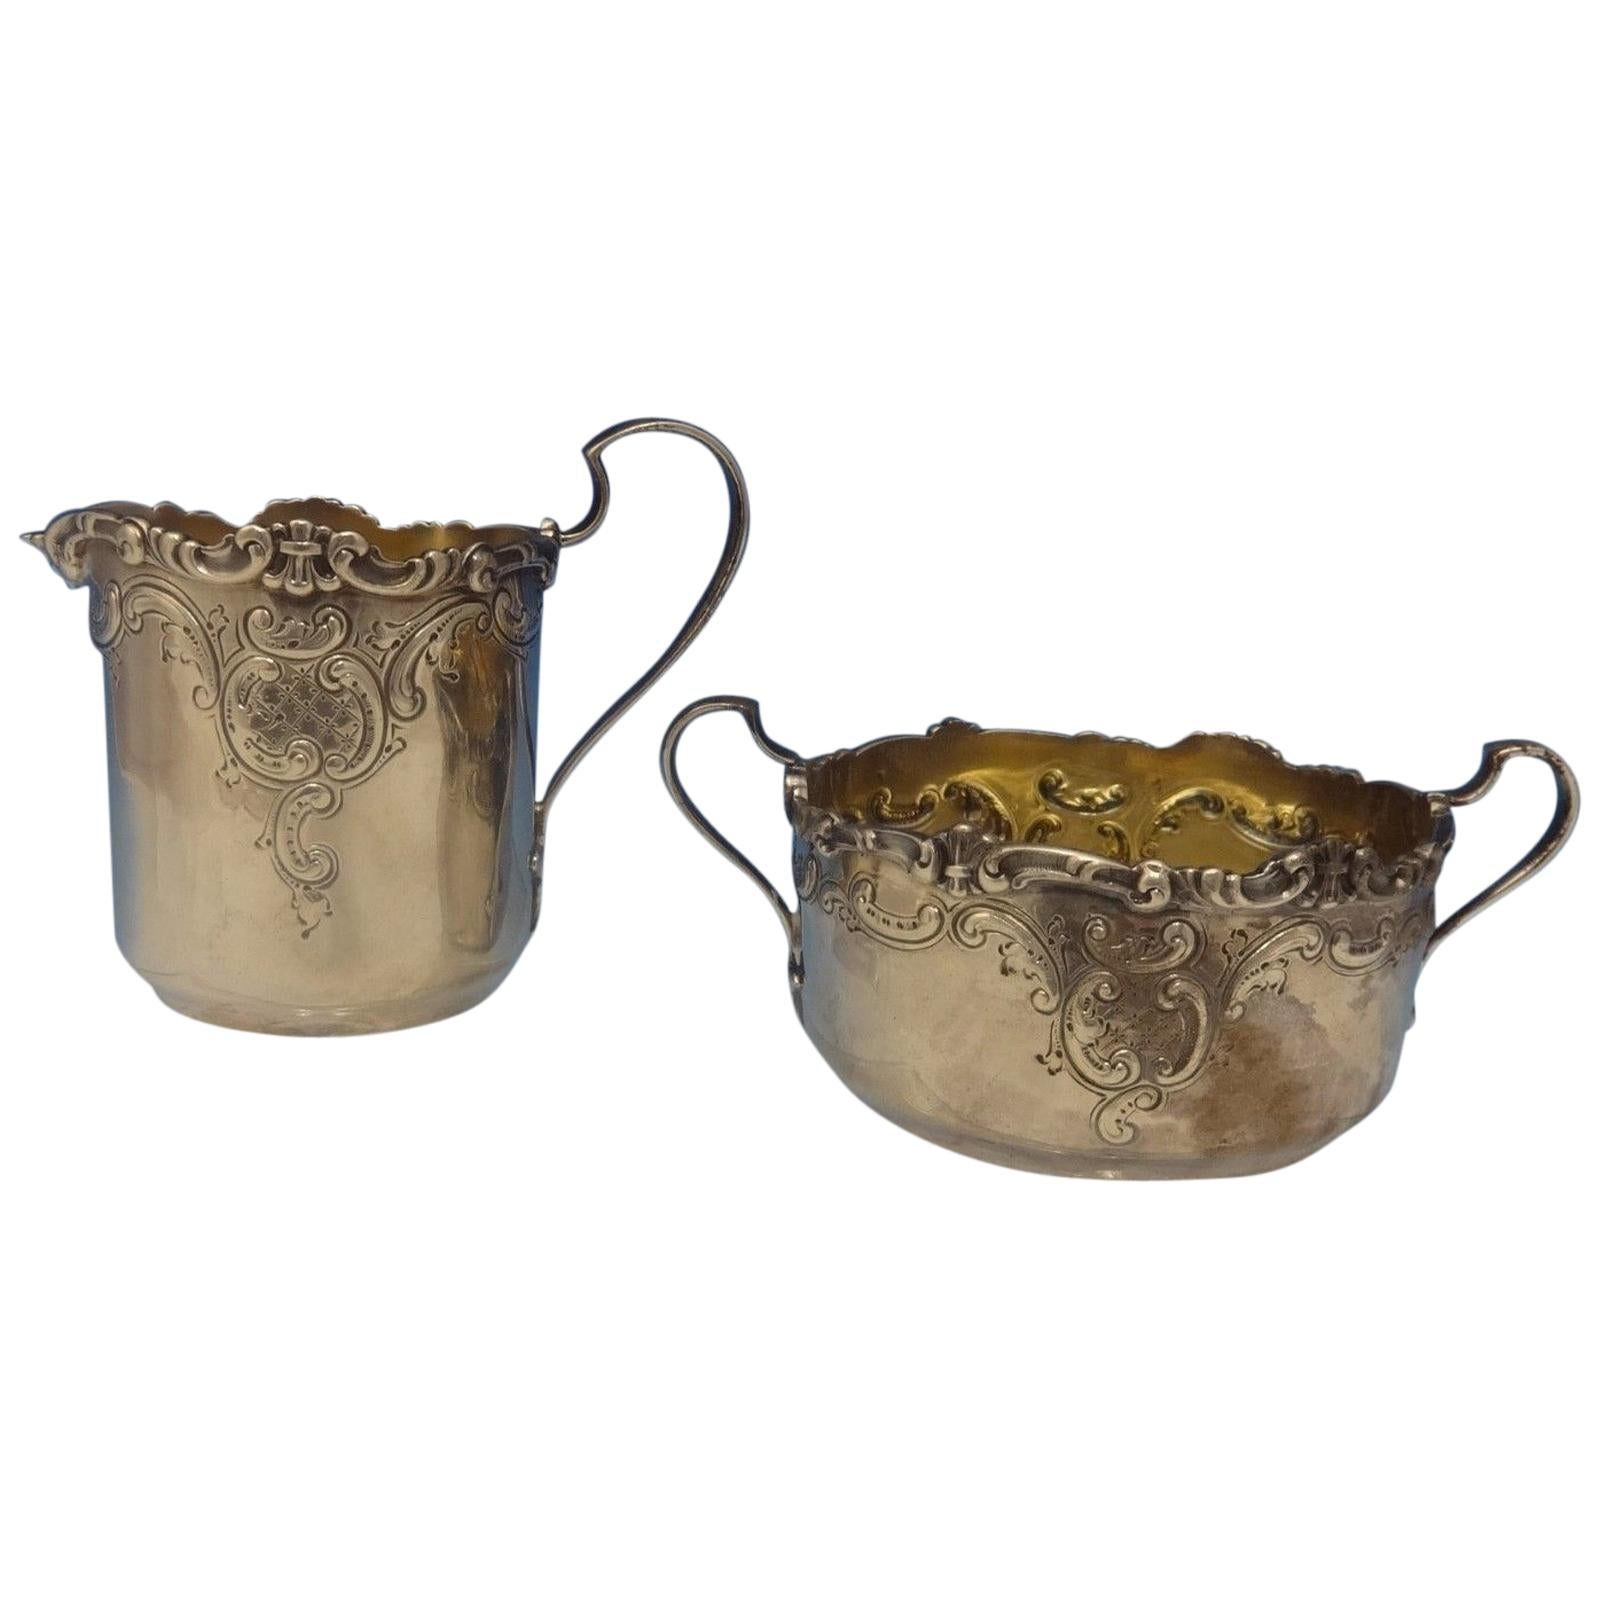 Dominick and Haff Sugar Bowl and Creamer 2-Piece with Repoussed Scrollwork